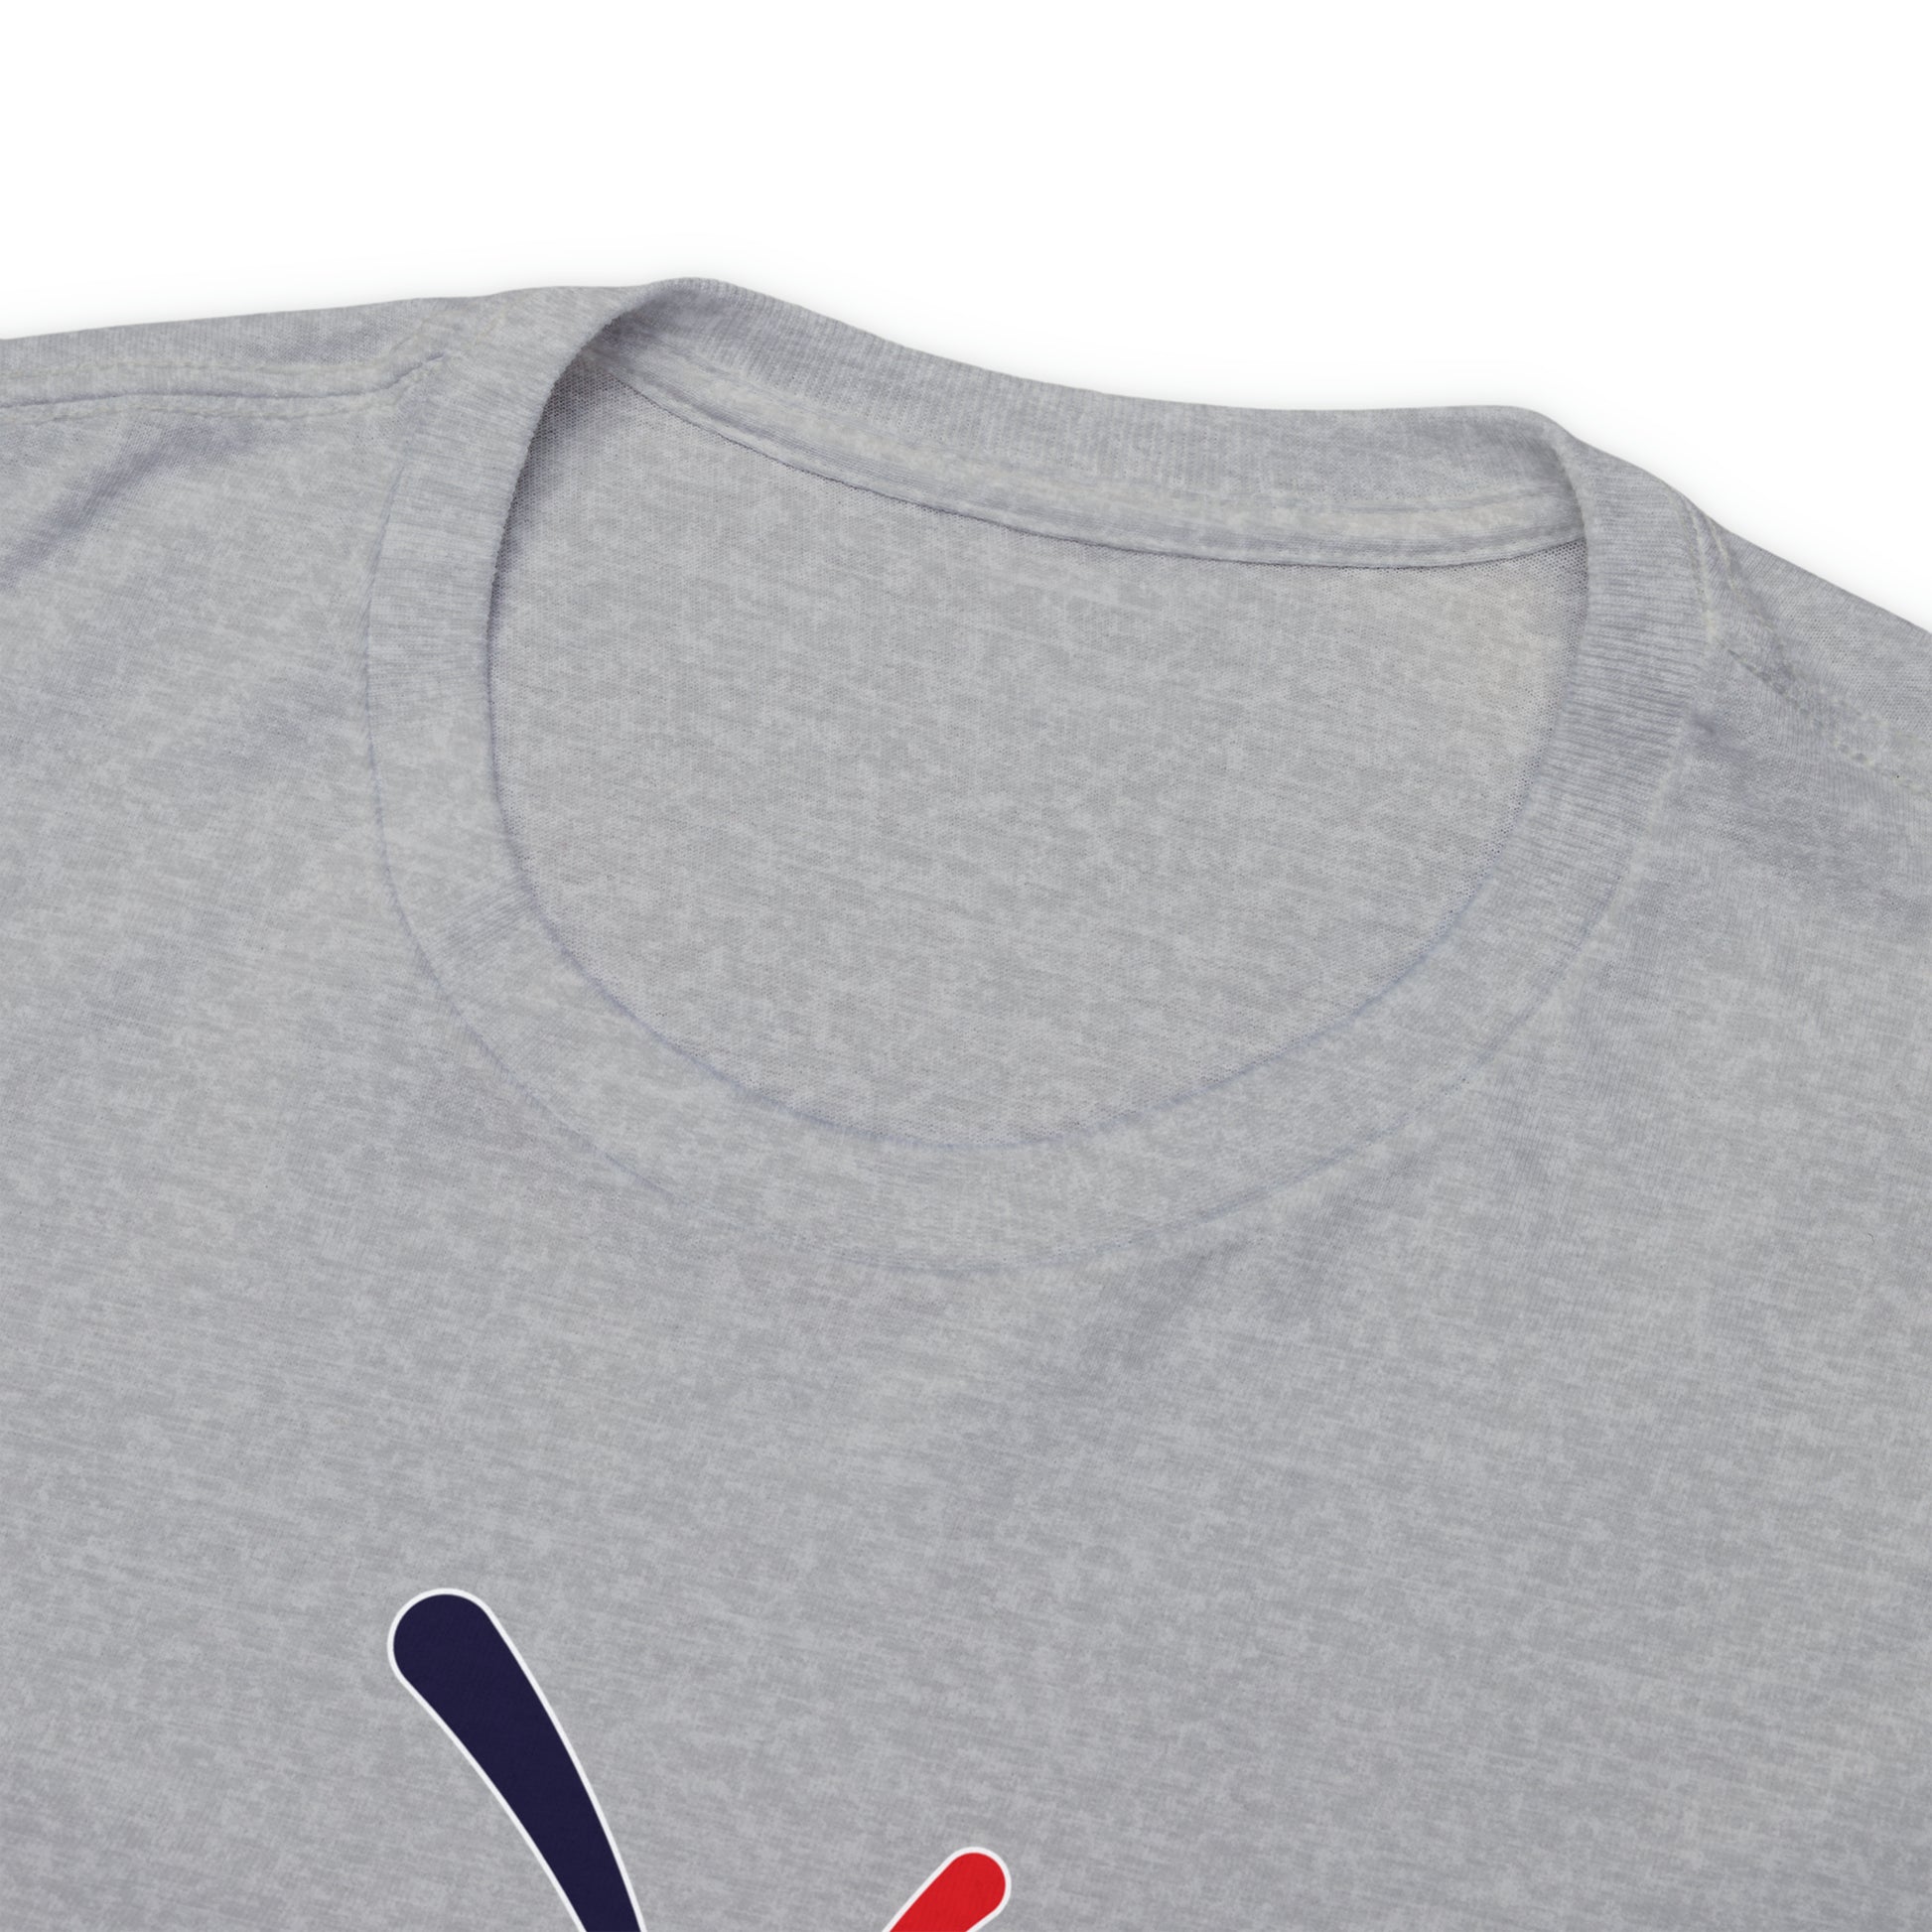 Front view of the neck detail of the Sport Grey t-shirt